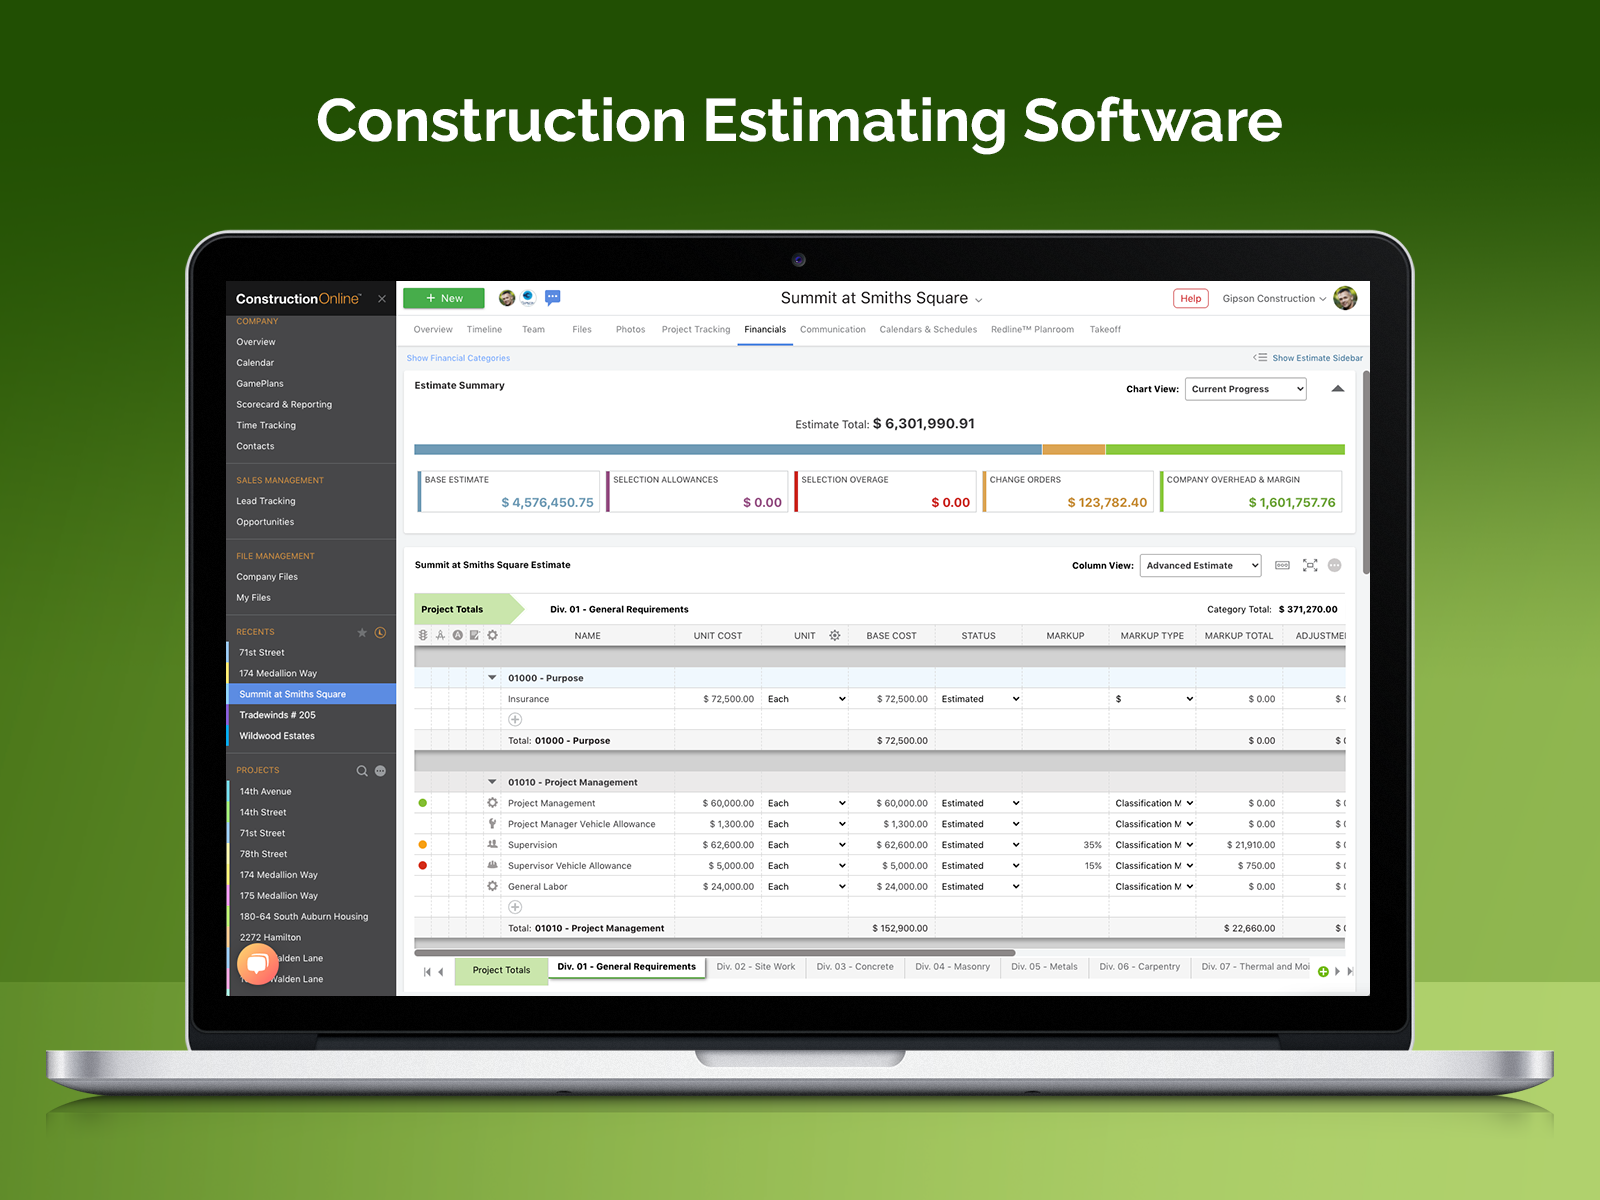 Detailed construction estimating and job costing